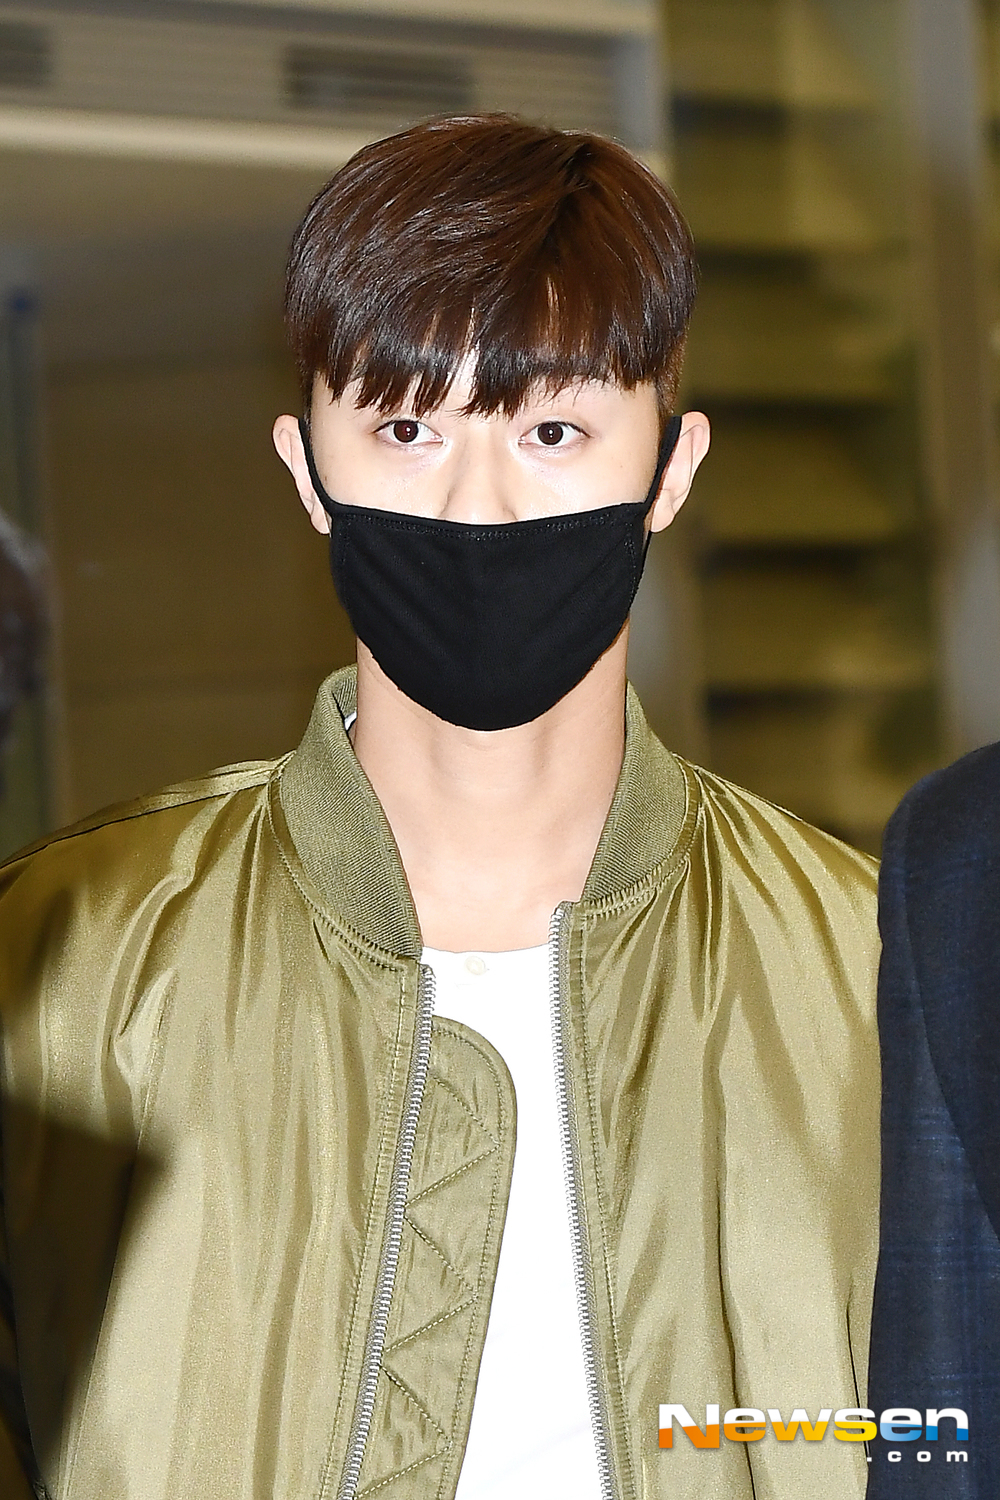 Actor Park Seo-joon arrived at Incheon International Airport in Unseo-dong, Jung-gu, Incheon on the afternoon of January 15 after finishing the AD shooting.Actor Park Seo-joon is entering the country with an Airport fashion.exponential earthquake